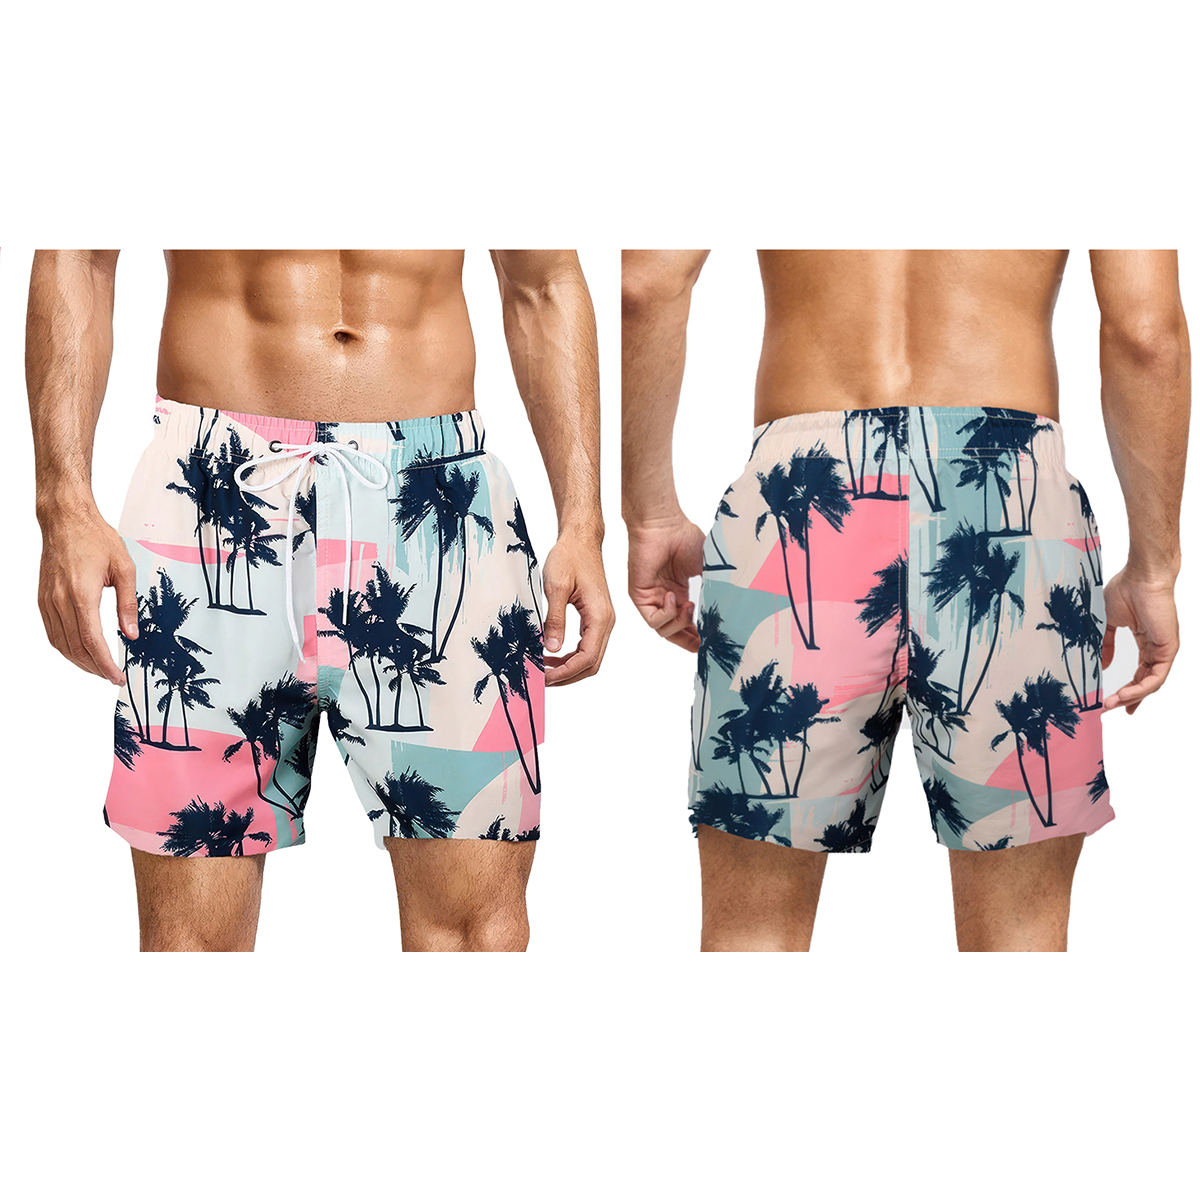 3-Pack: Men's Quick-Dry Solid & Printed Summer Beach Surf Board Swim Trunks Shorts - Small, Solid